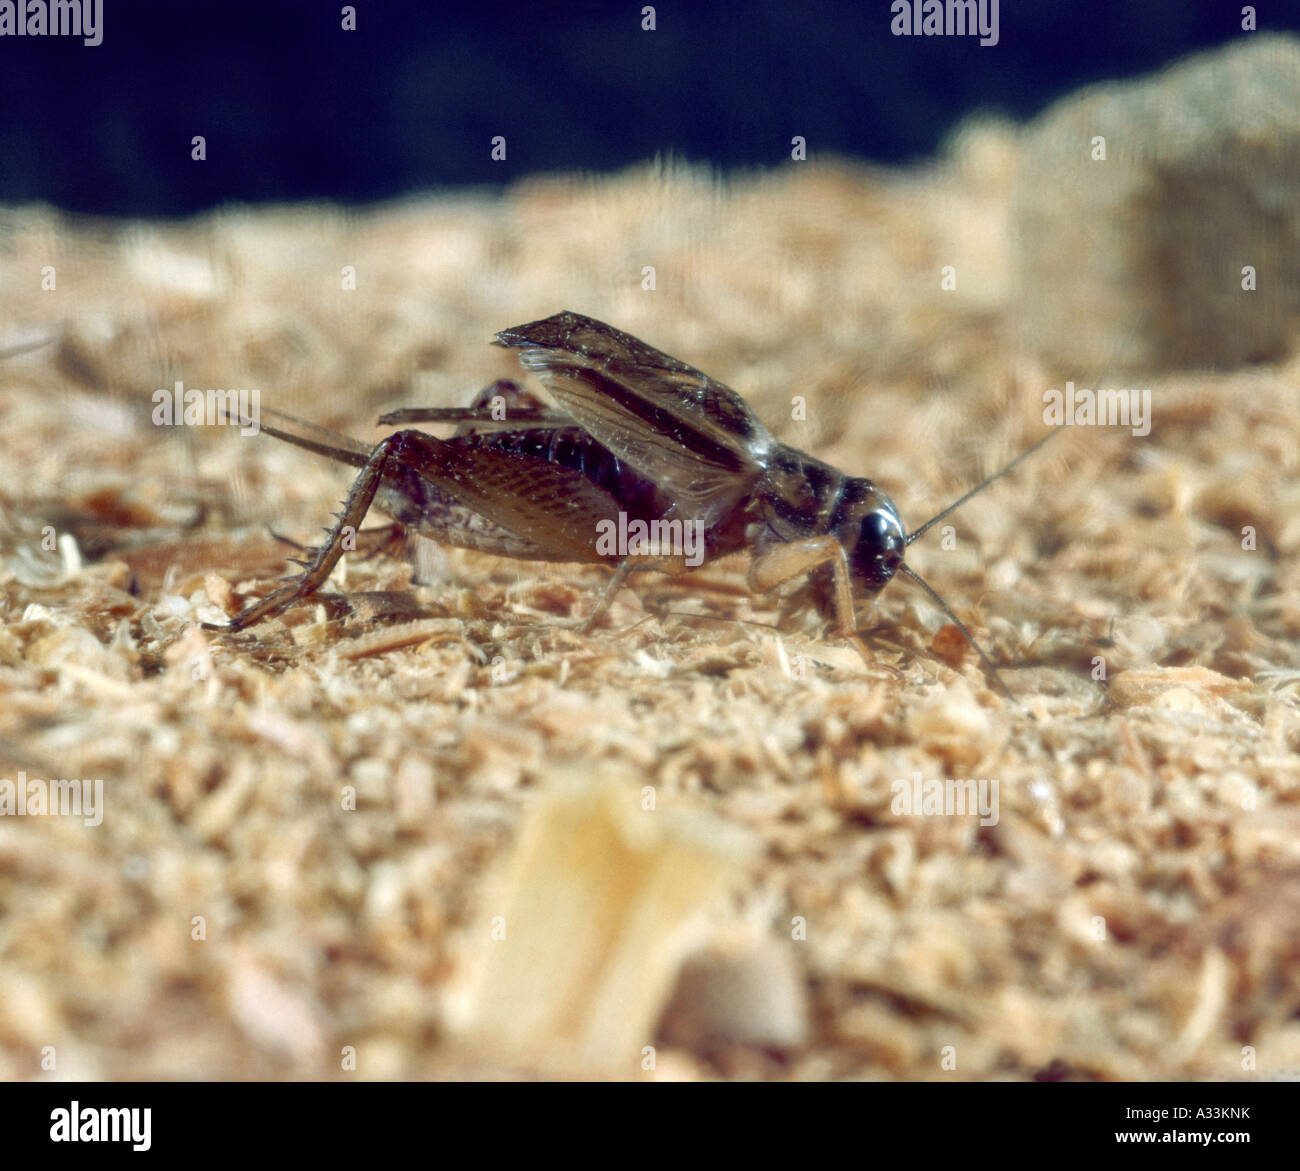 HOUSE CRICKET OR CRICKET ON THE HEARTH (GRYLLUS DOMESTICA; ACHETA DOMESTICA) ADULT CRICKET; CHIRPING; HOUSEHOLD PEST Stock Photo